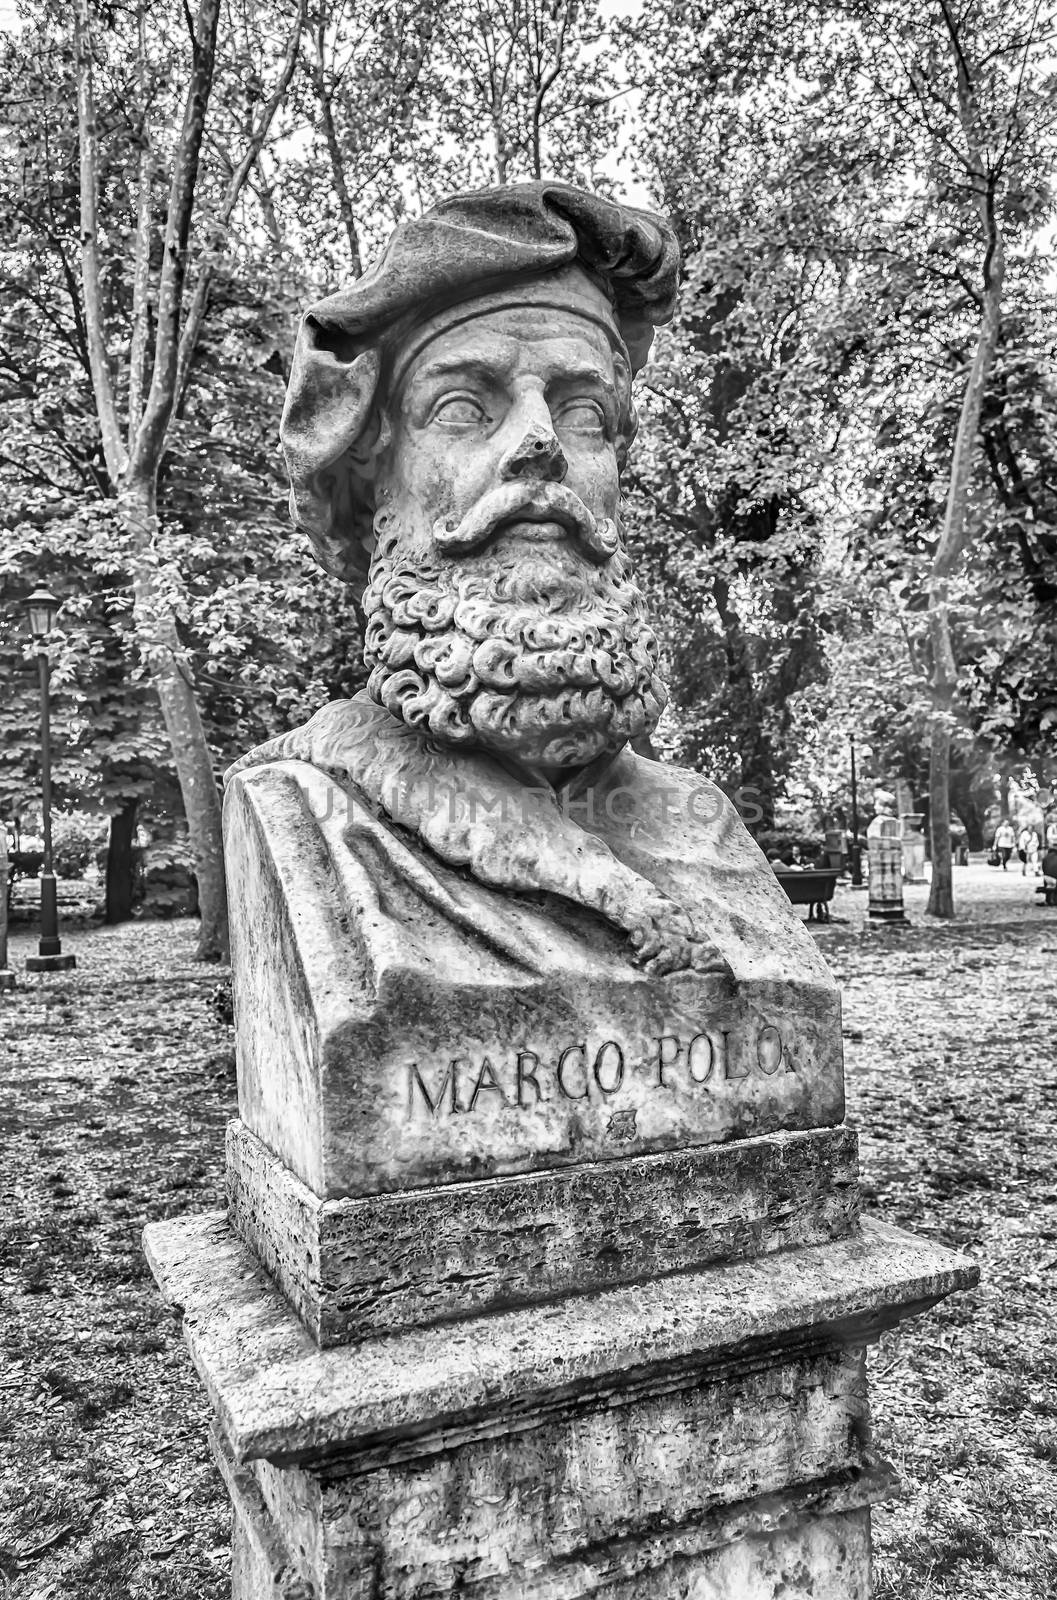 Bust statue of Marco Polo (September 15, 1254 – January 8–9, 1324) who was a legendary Venetian merchant traveller. Sculpture in Villa Borghese park, Rome